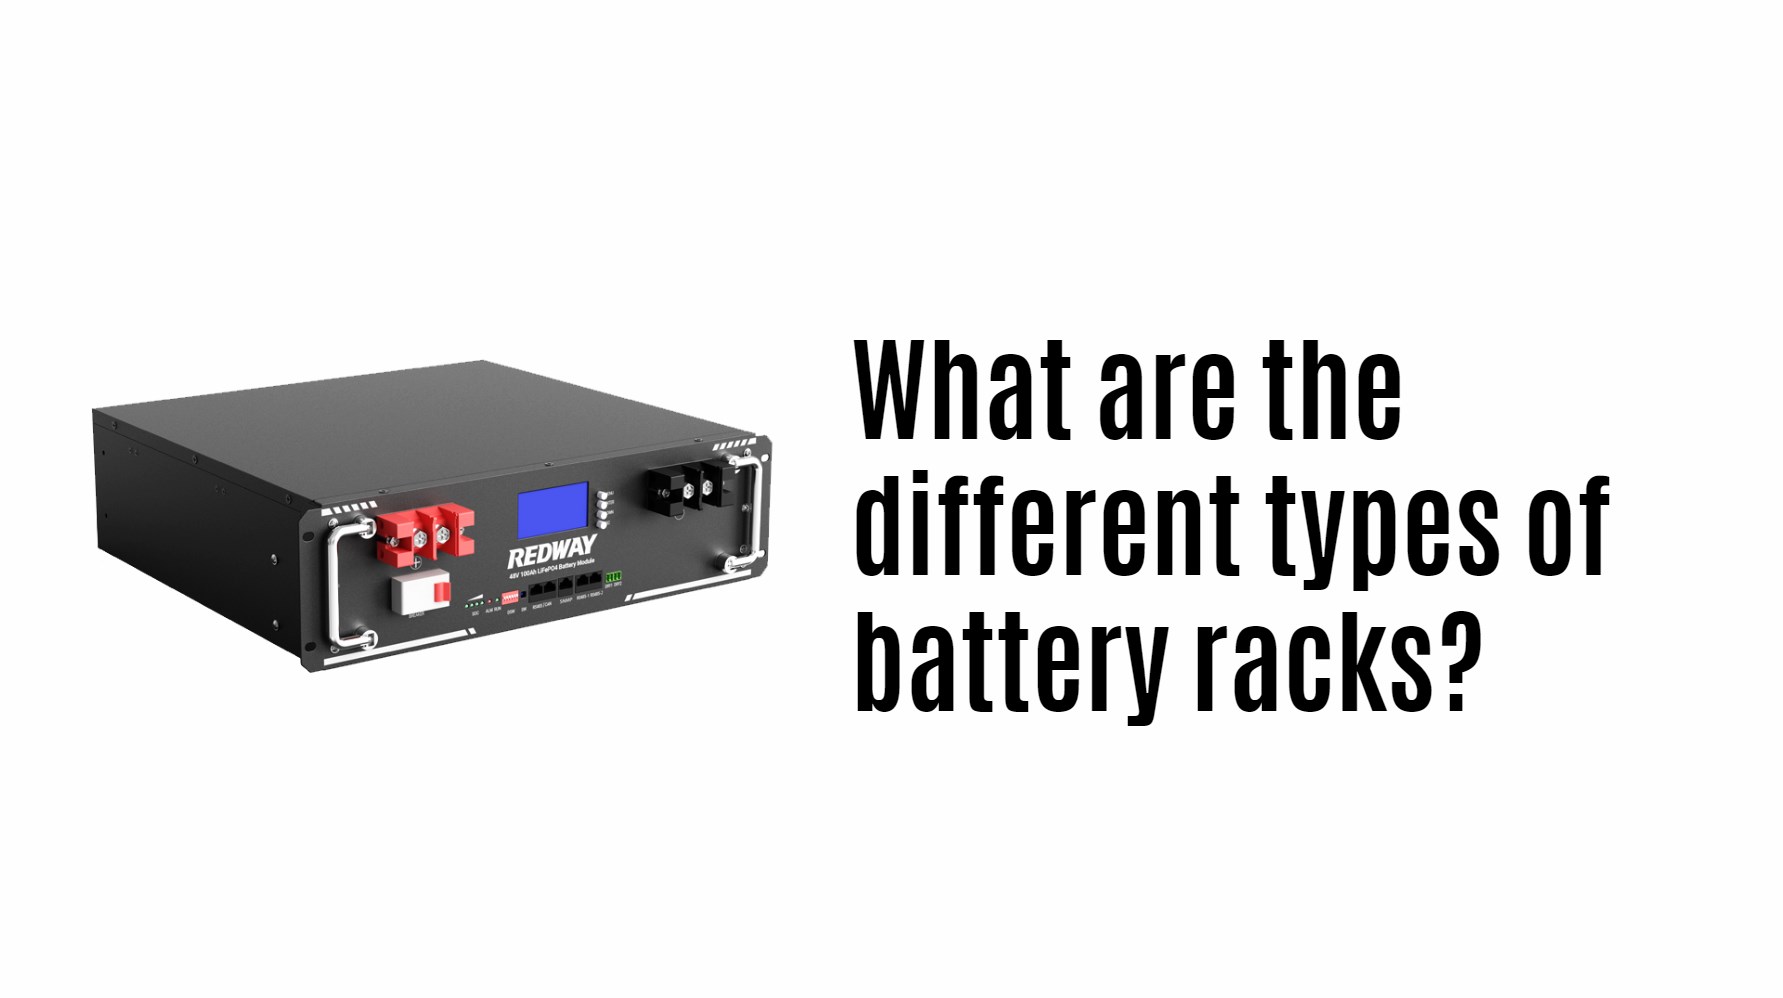 What are the different types of battery racks?